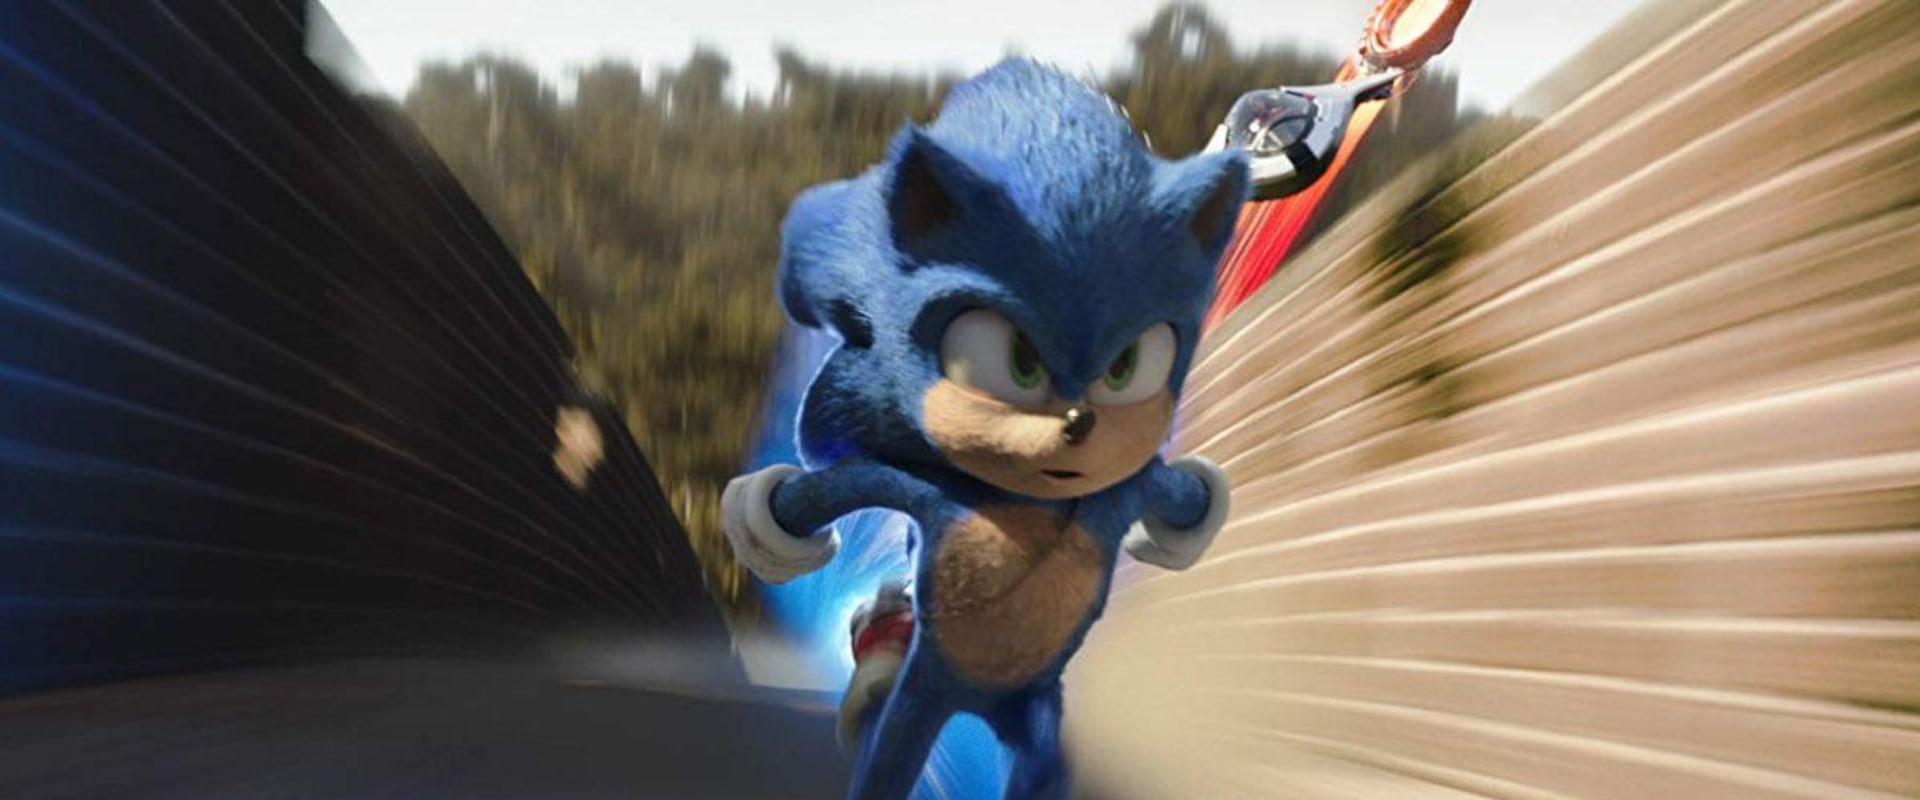 Sonic the Hedgehog: An Engaging and Informative Overview